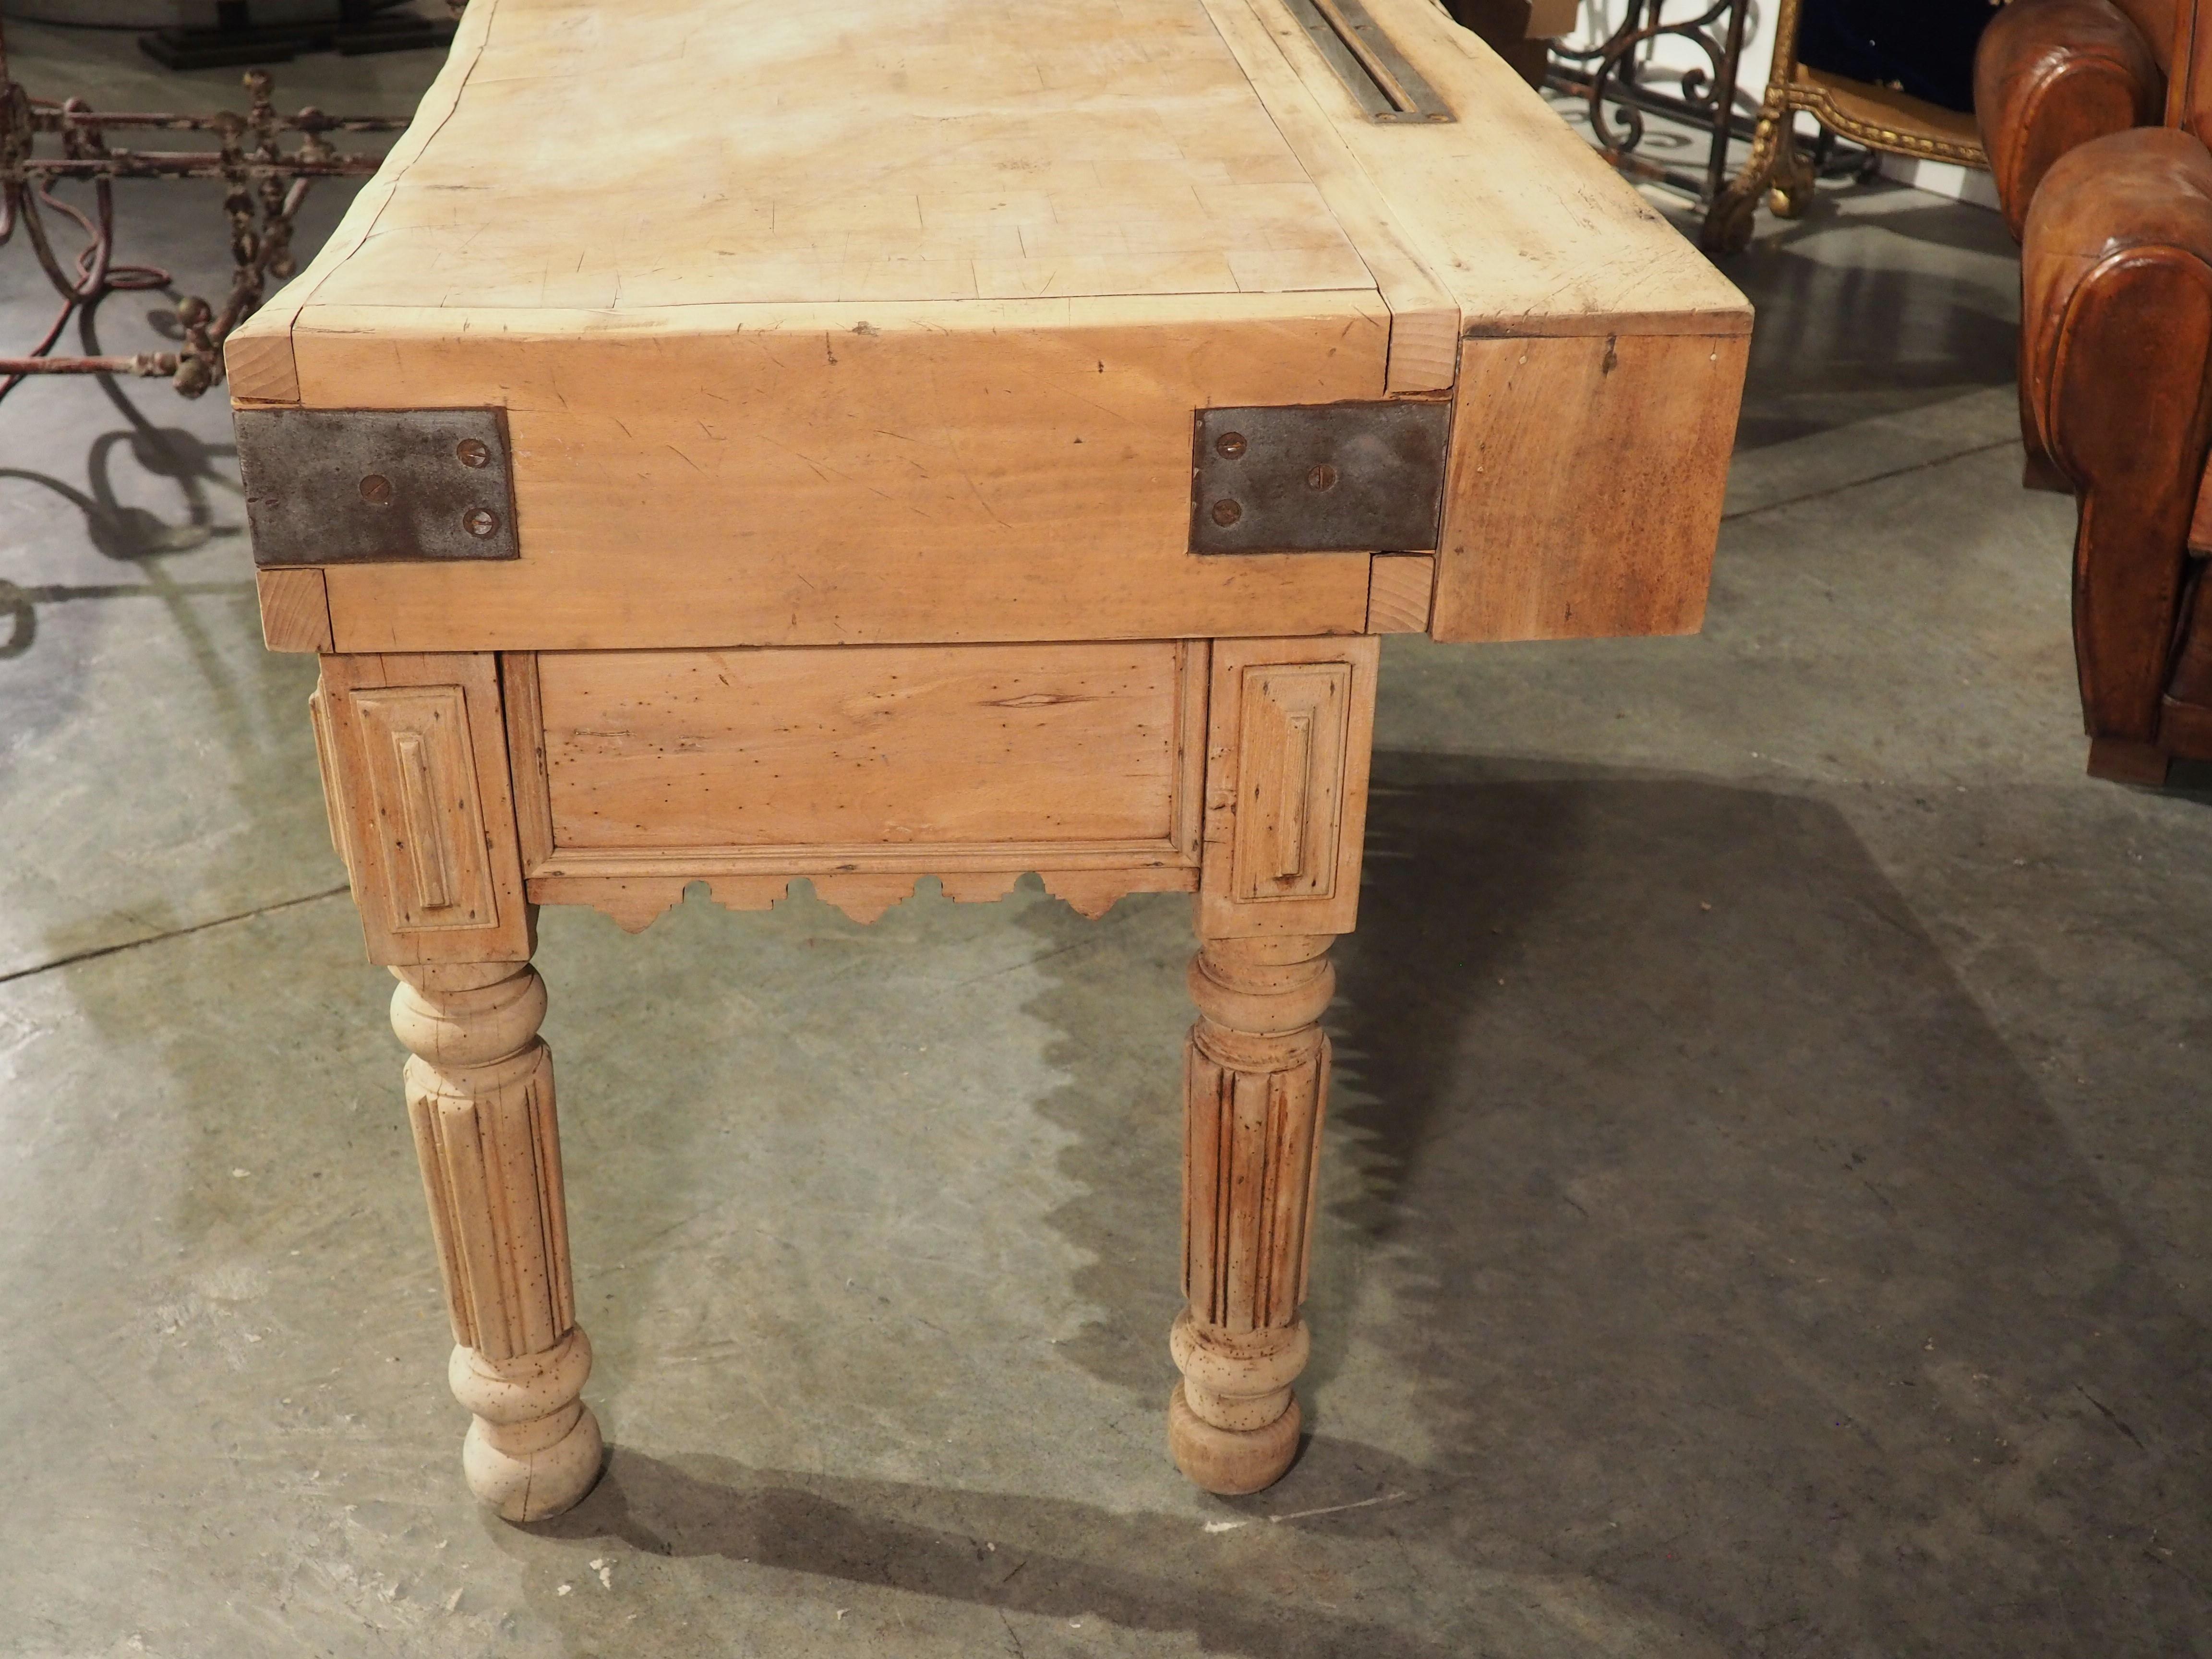 Circa 1880 Butcher Block Table from Lille, France 12